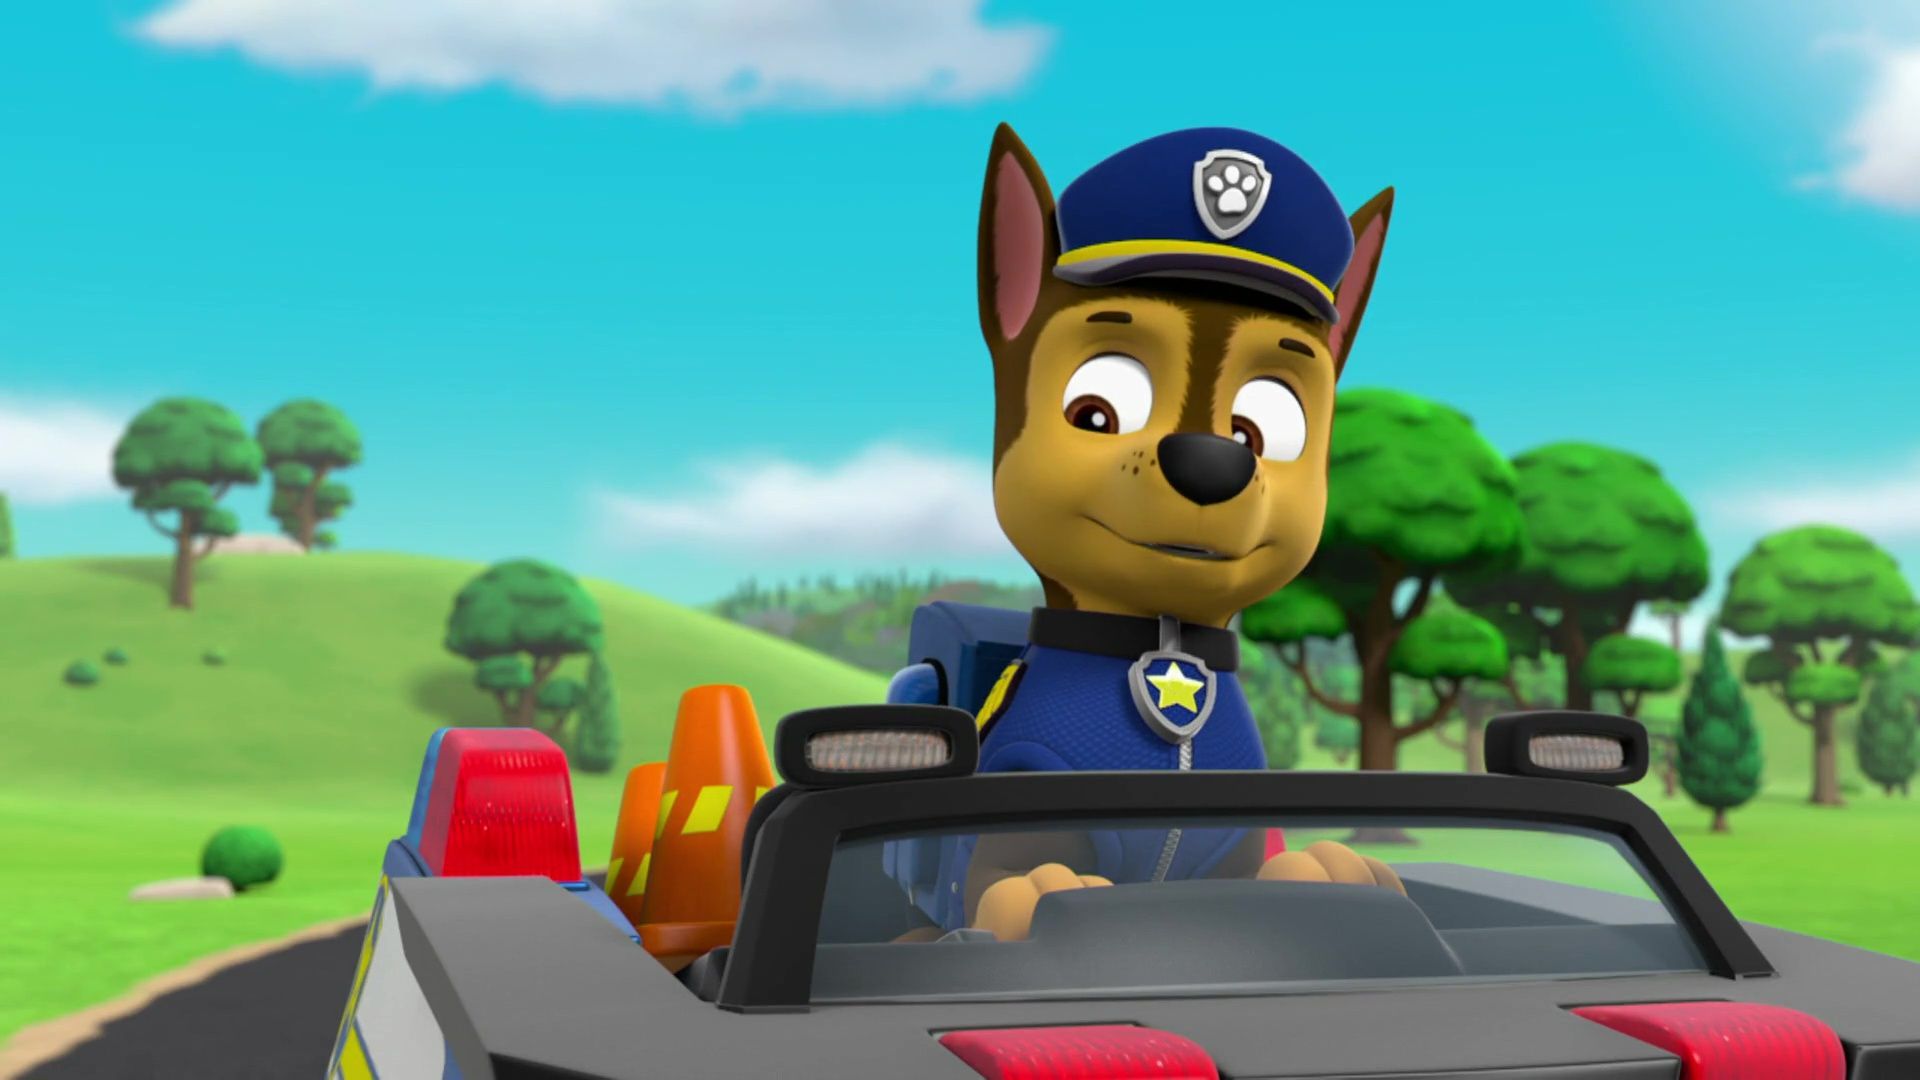 Chase Paw Patrol Wallpapers.